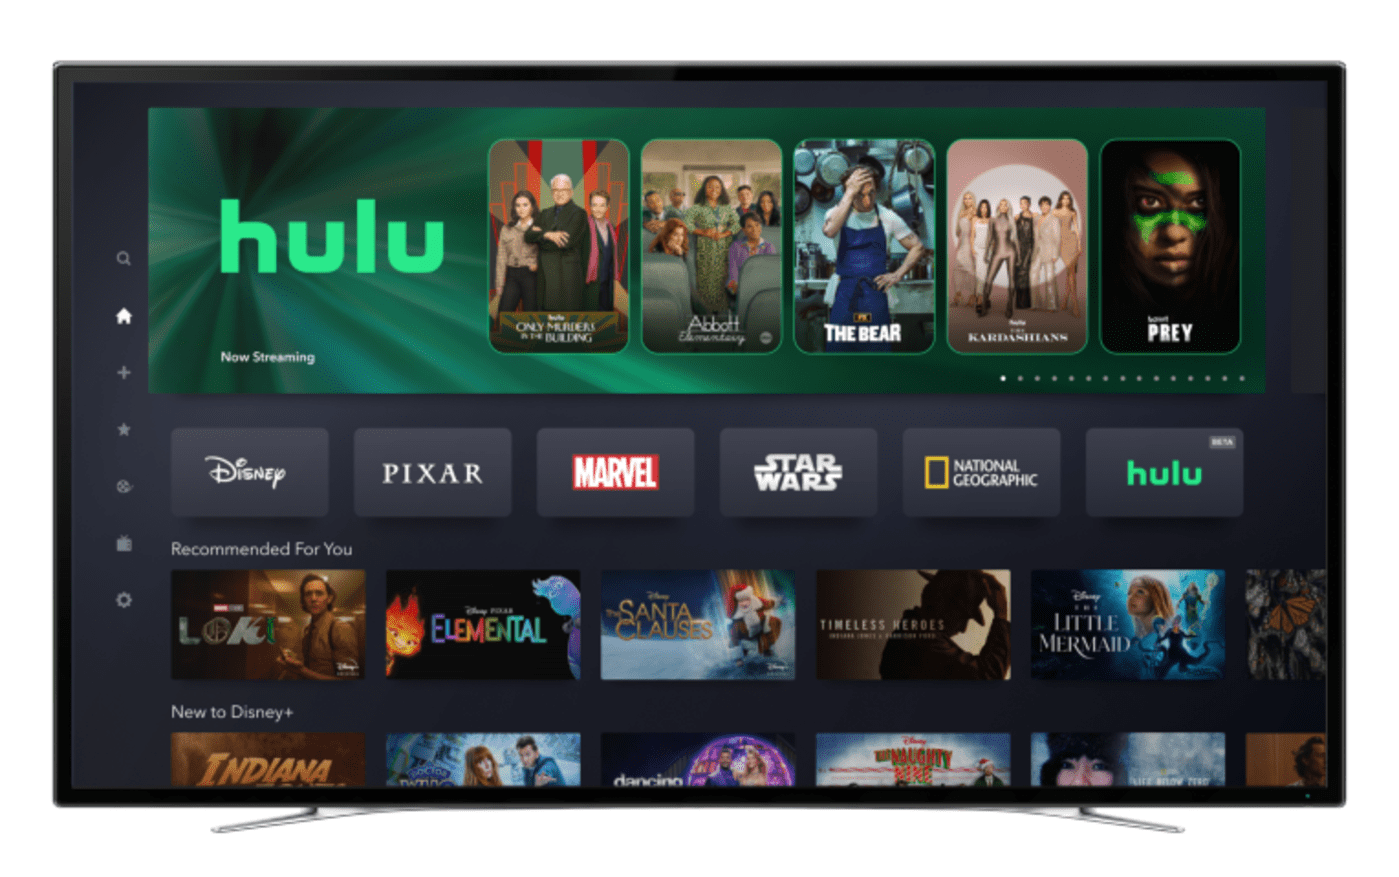 Disney+ adds a Hulu tab as the streaming services start integrating